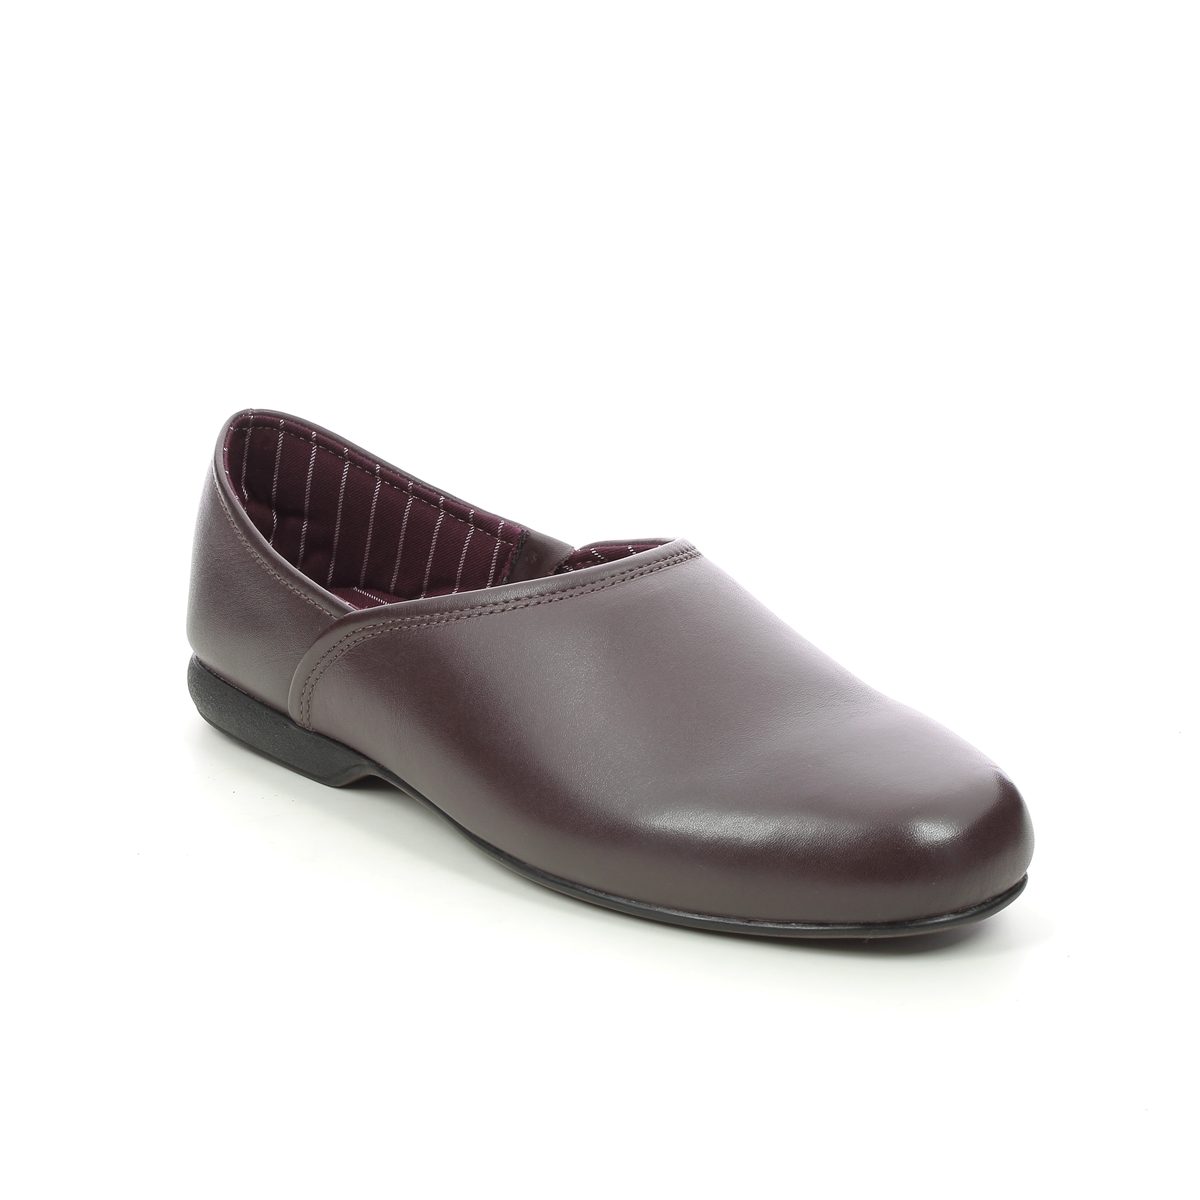 Clarks Harston Elite Burgundy Leather Mens slippers 4472-17G in a Plain Leather in Size 11